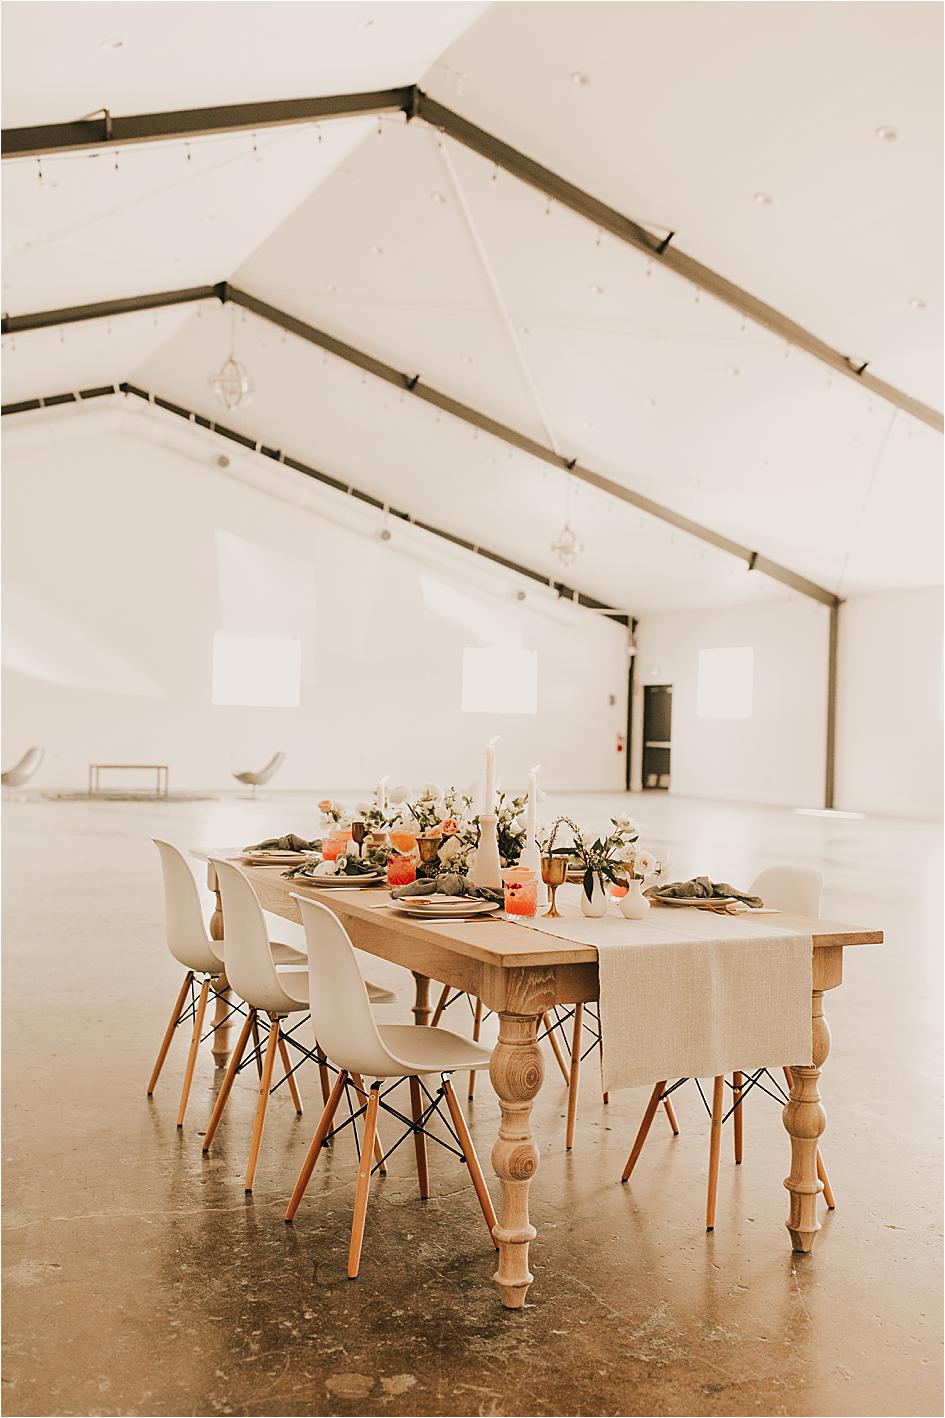 california venue, wedding venue, wedding inspiration, styled shoot, jays catering, catering california, wedding catering